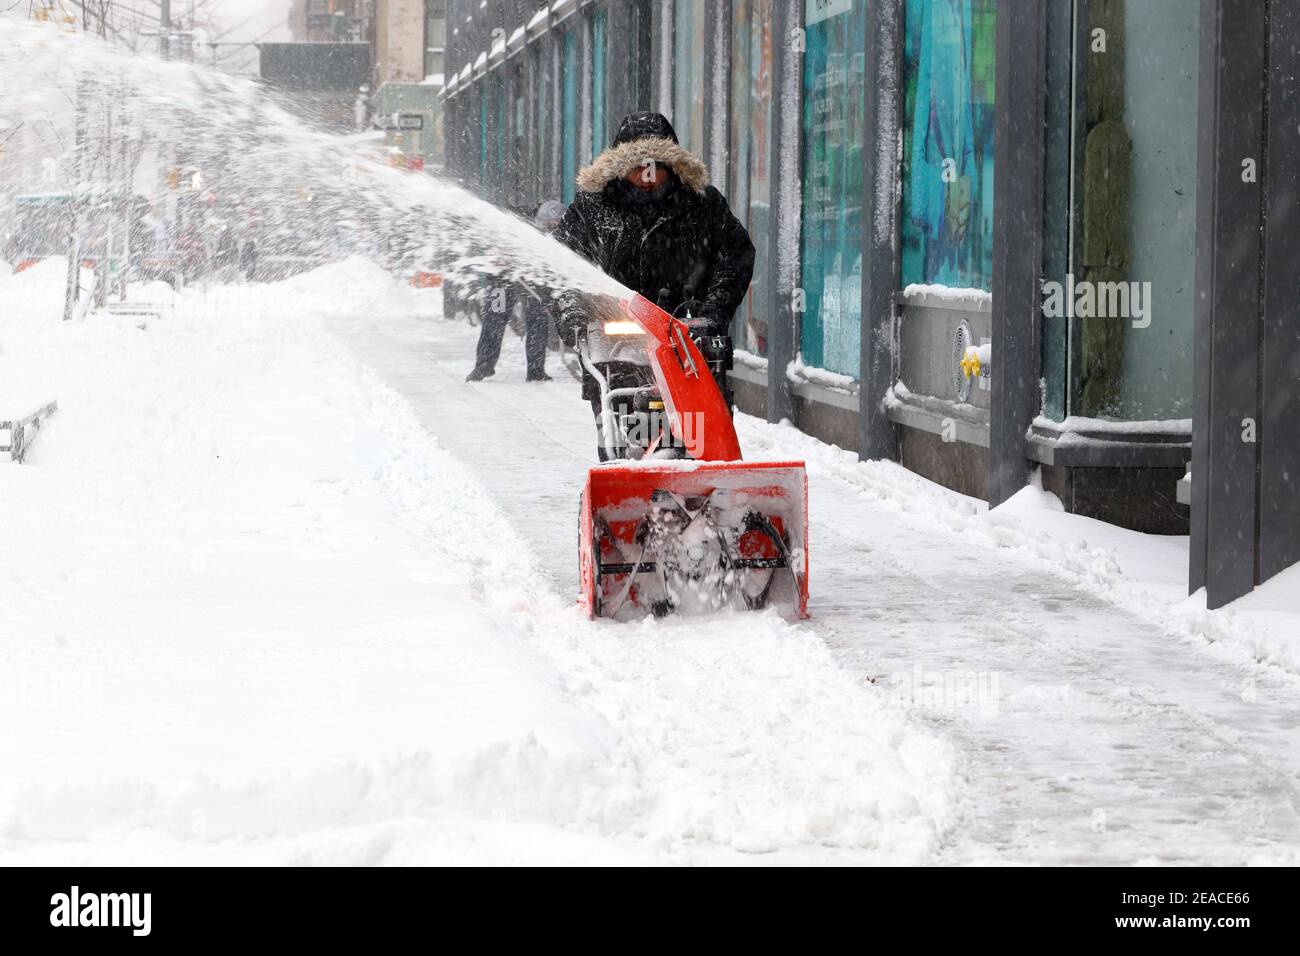 A person uses a snowblower to clear snow from a sidewalk after a winter snowstorm in New York, NY. Stock Photo